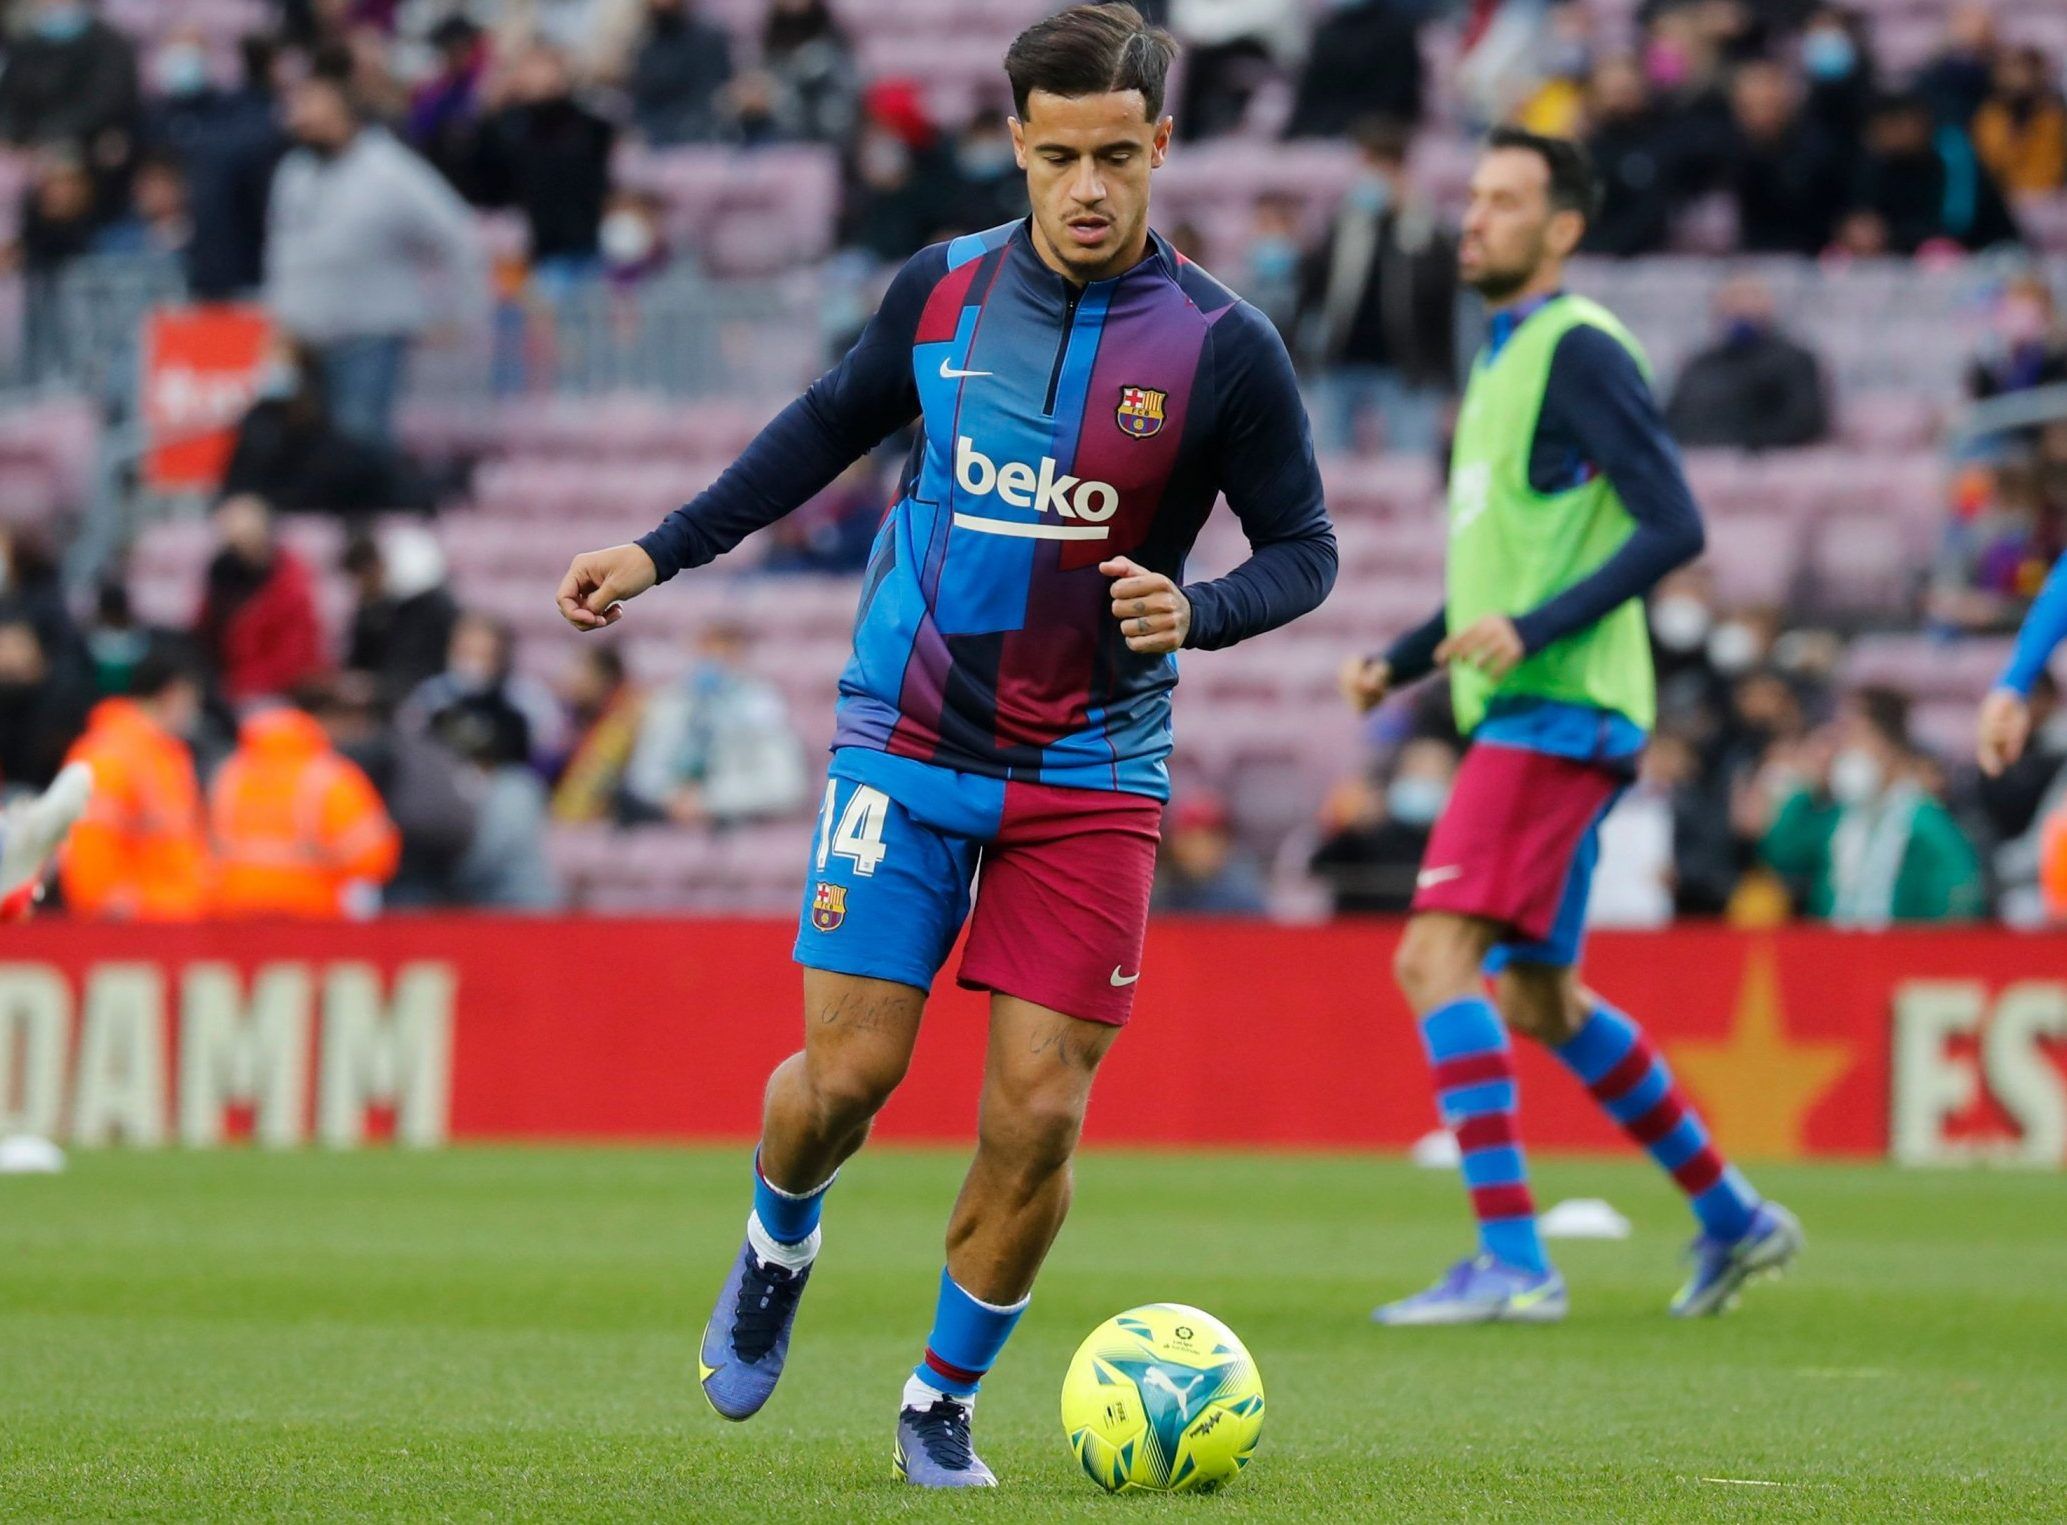 Barcelona midfielder Philippe Coutinho during warm up before Betis clash